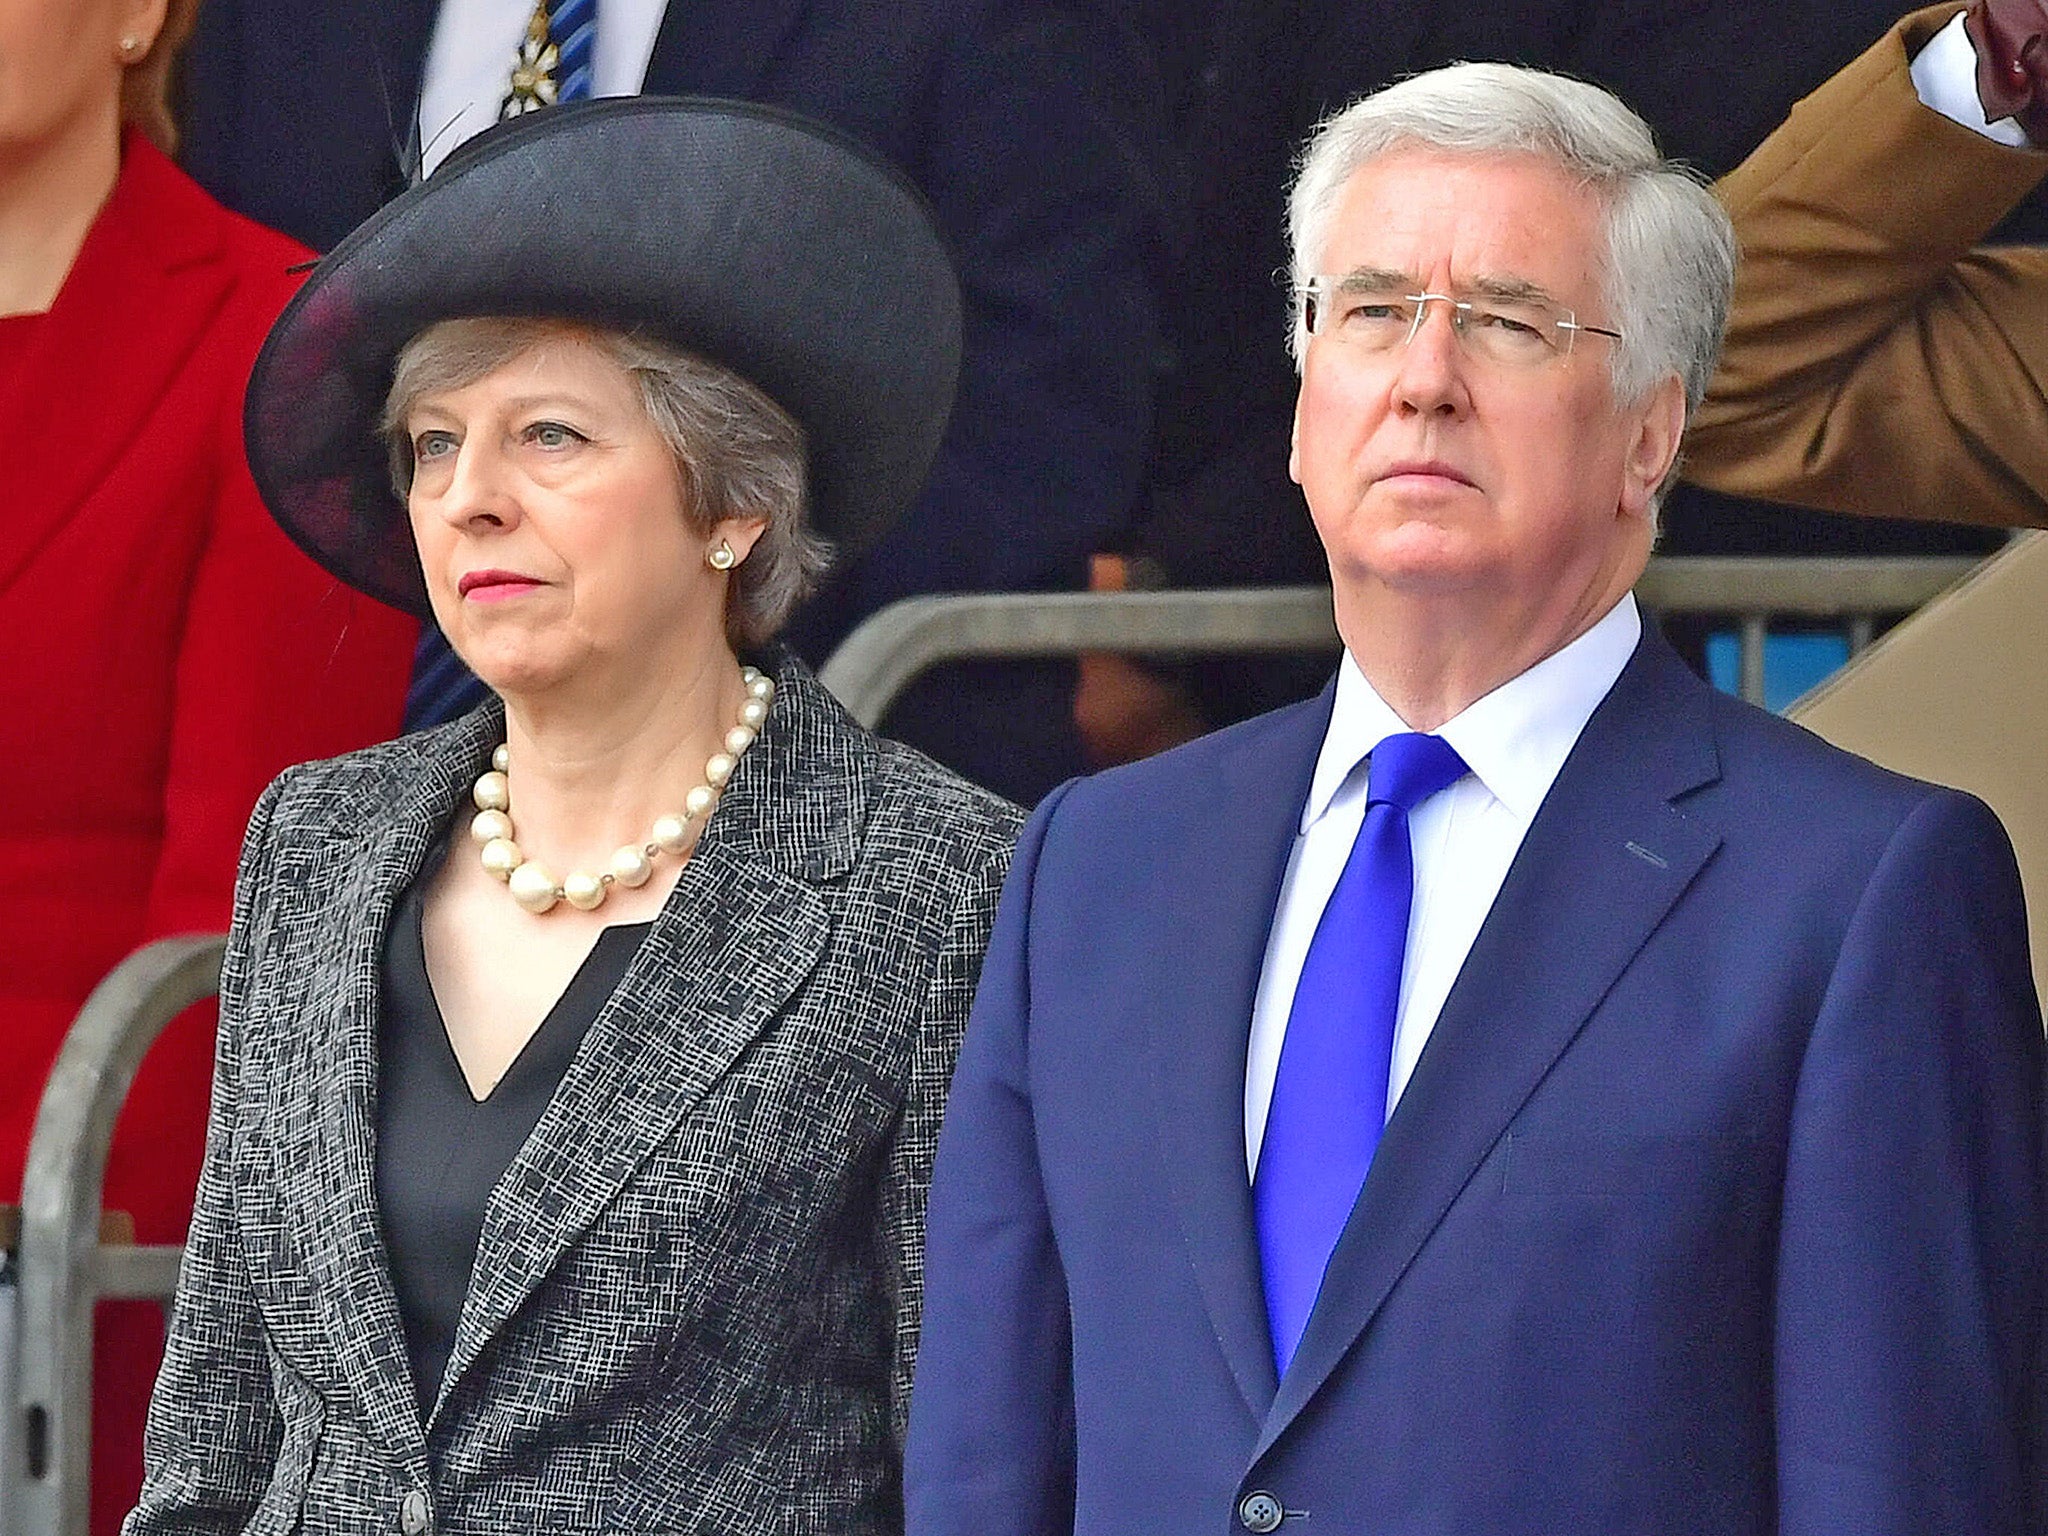 Michael Fallon, the former Defence Secretary, has stepped down after accusations of sexual harassment